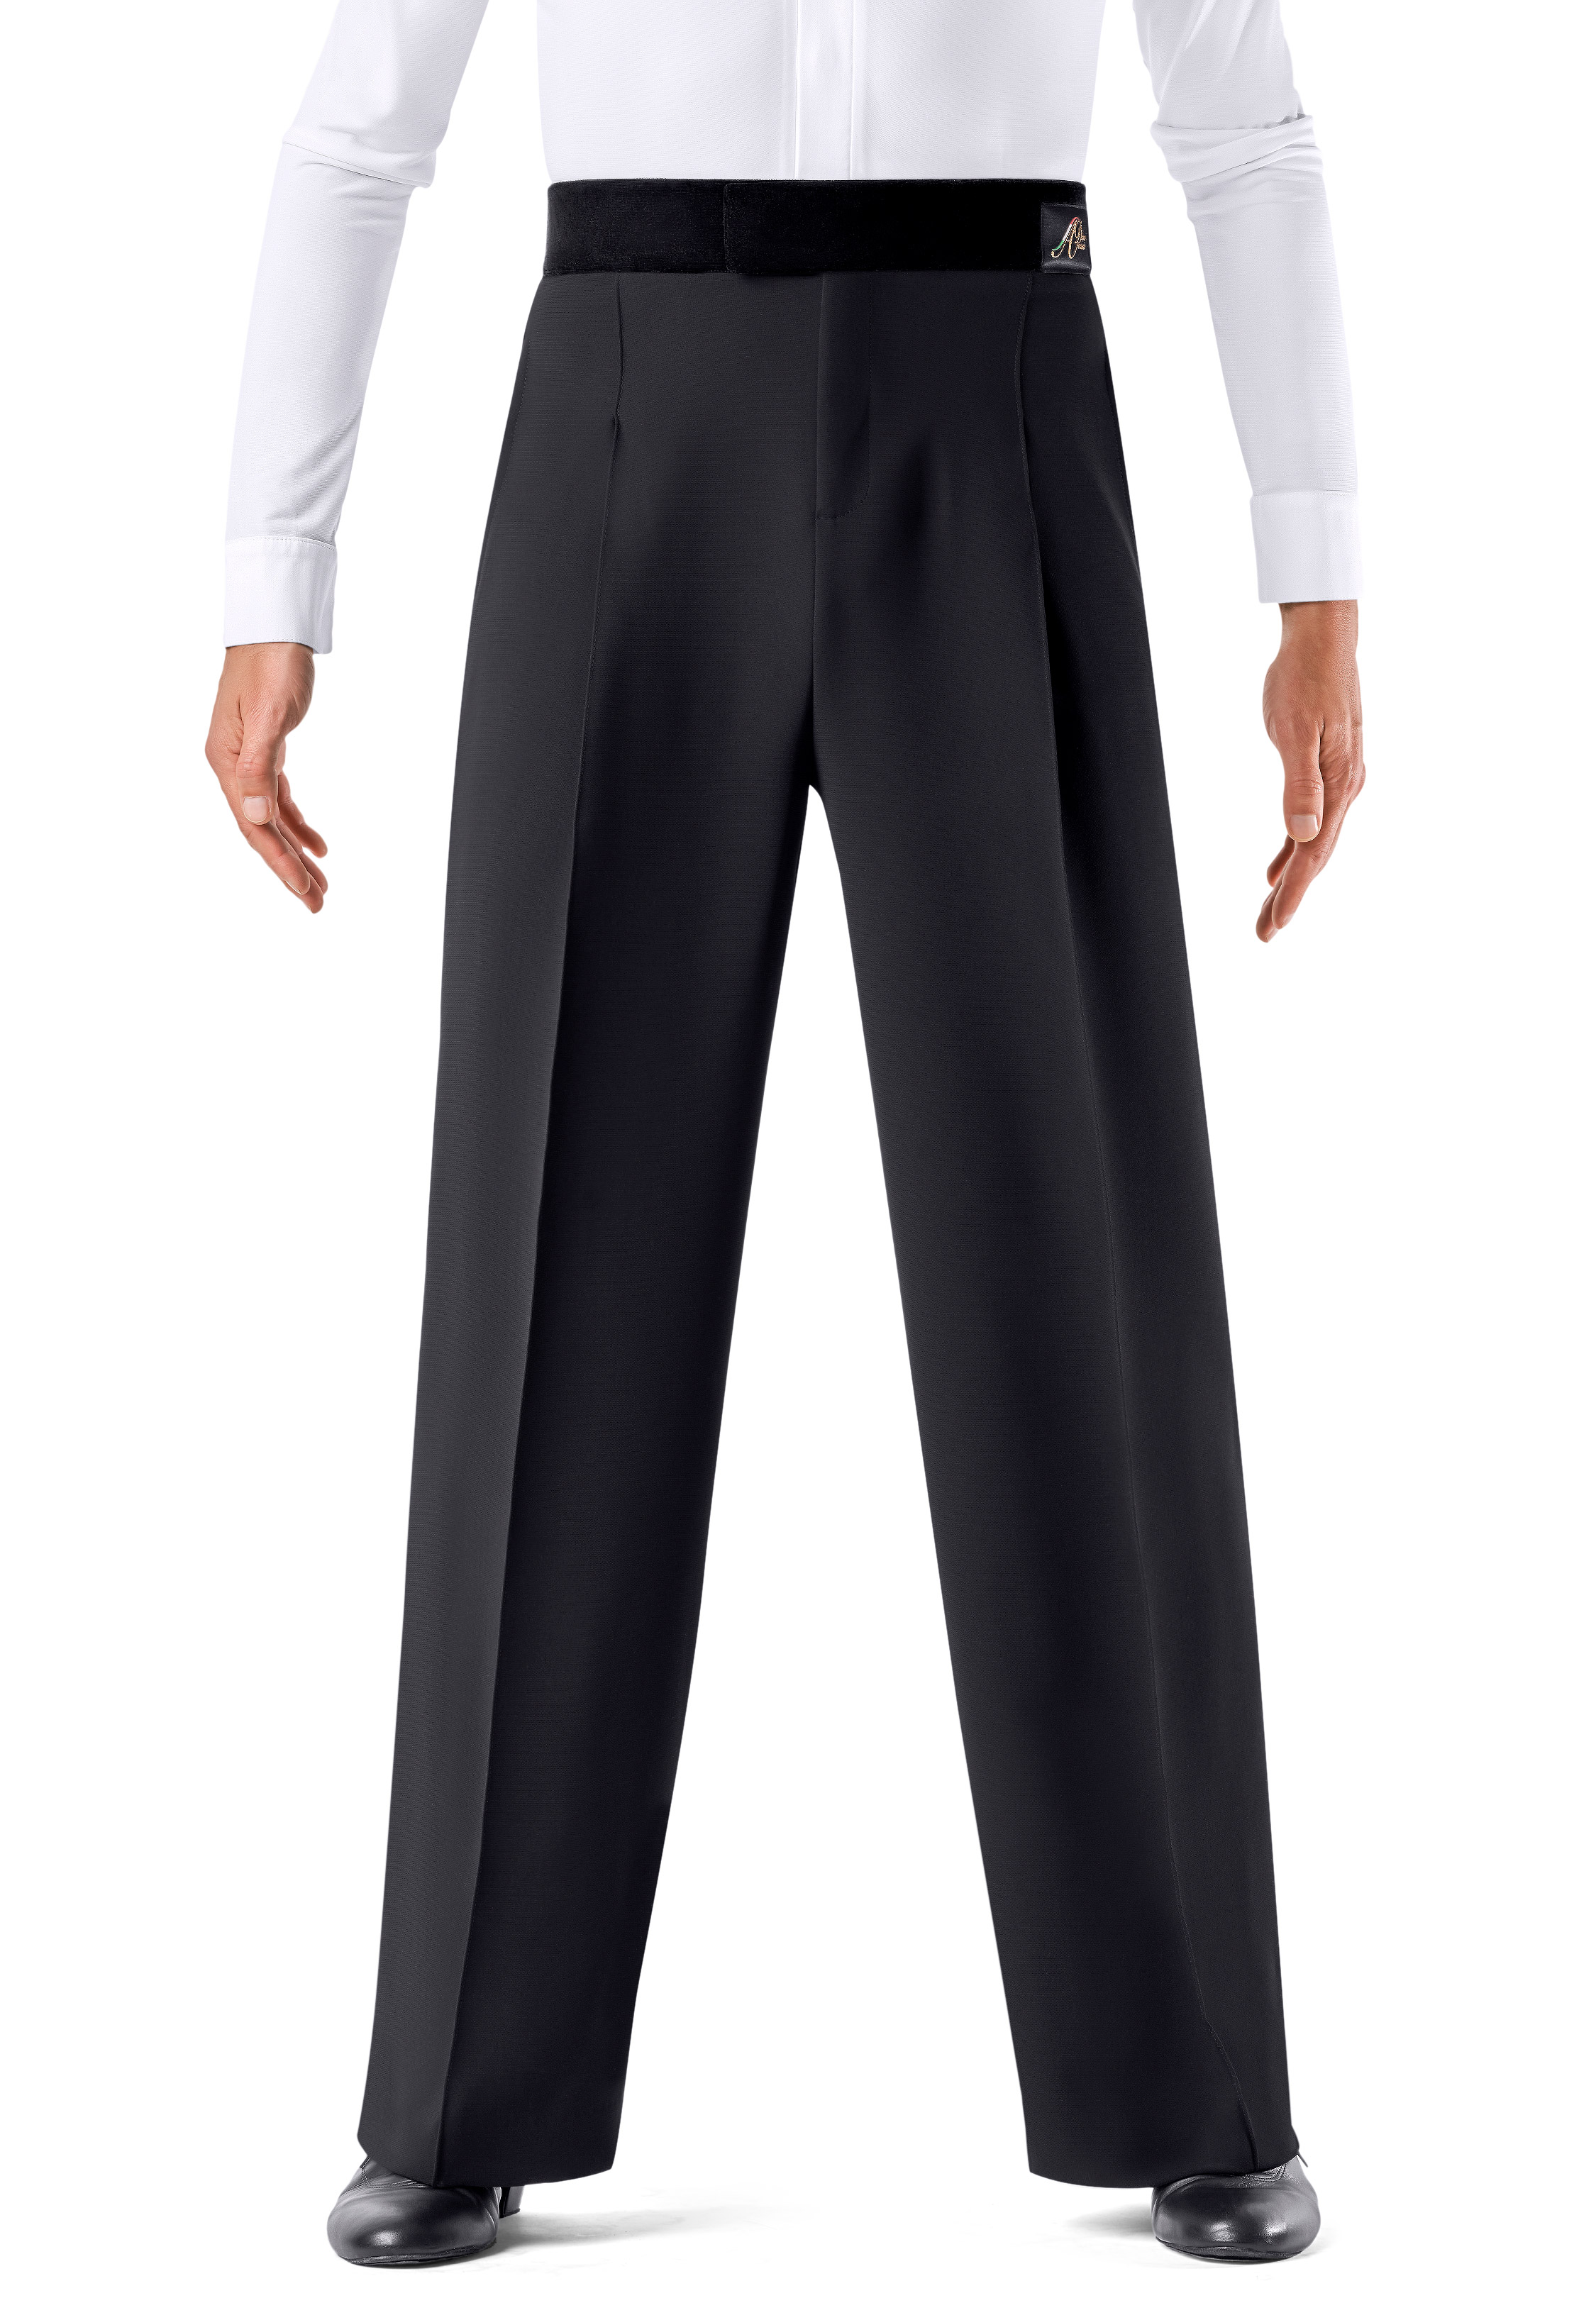 Jelory Men's Professional Straight Training Pant with Pockets Wide Latin Modern Square Practice Dance Pants 